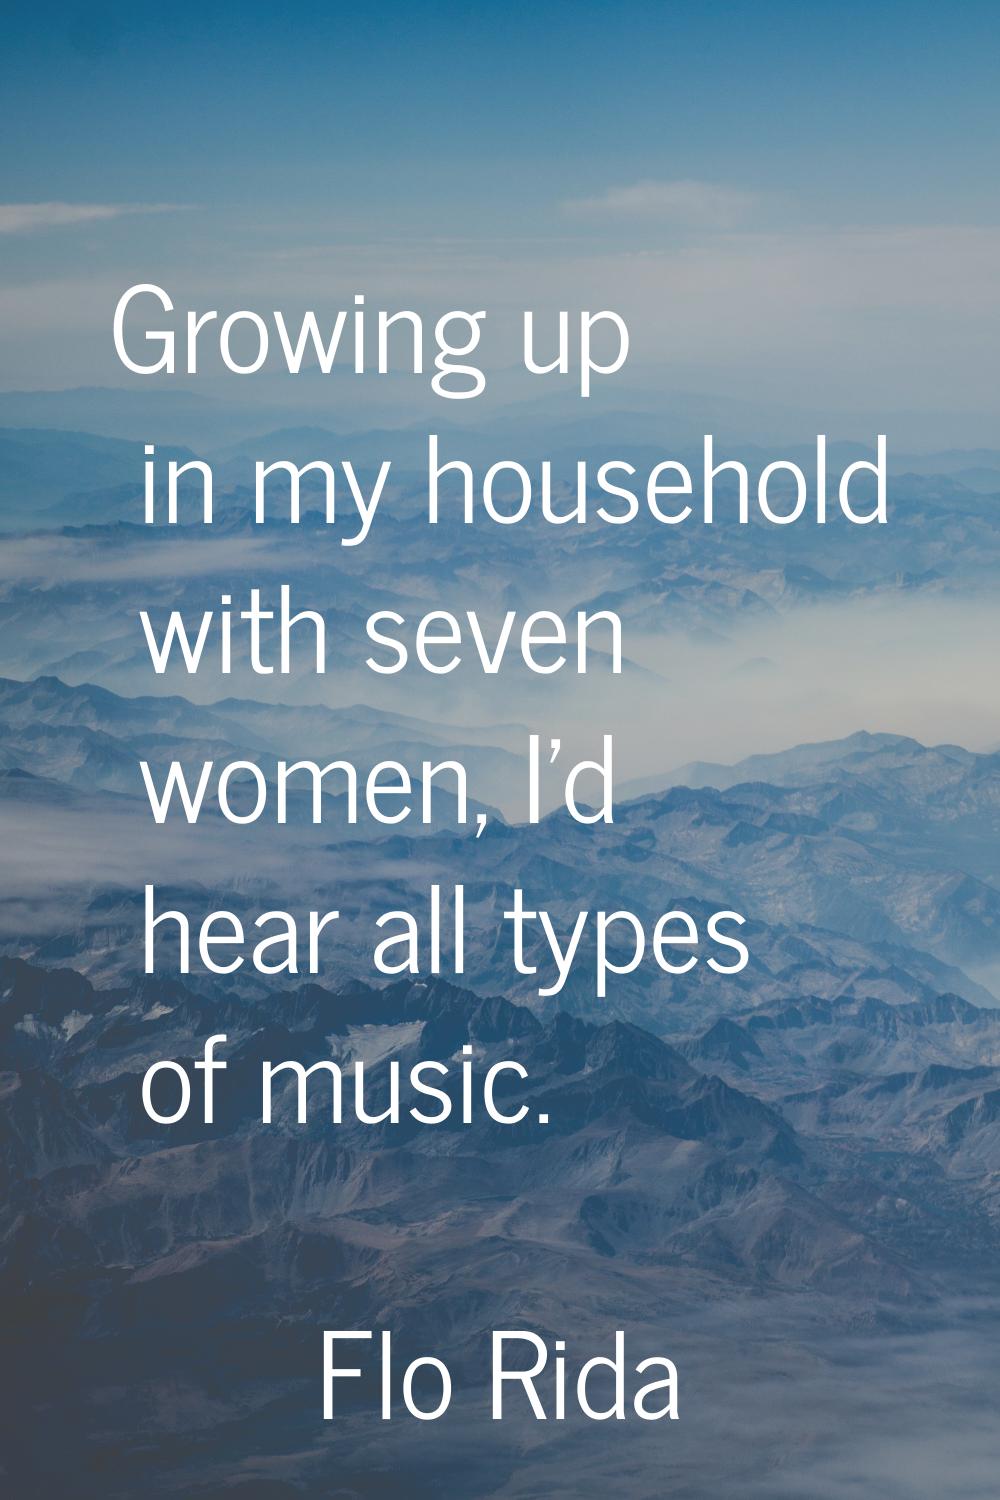 Growing up in my household with seven women, I'd hear all types of music.